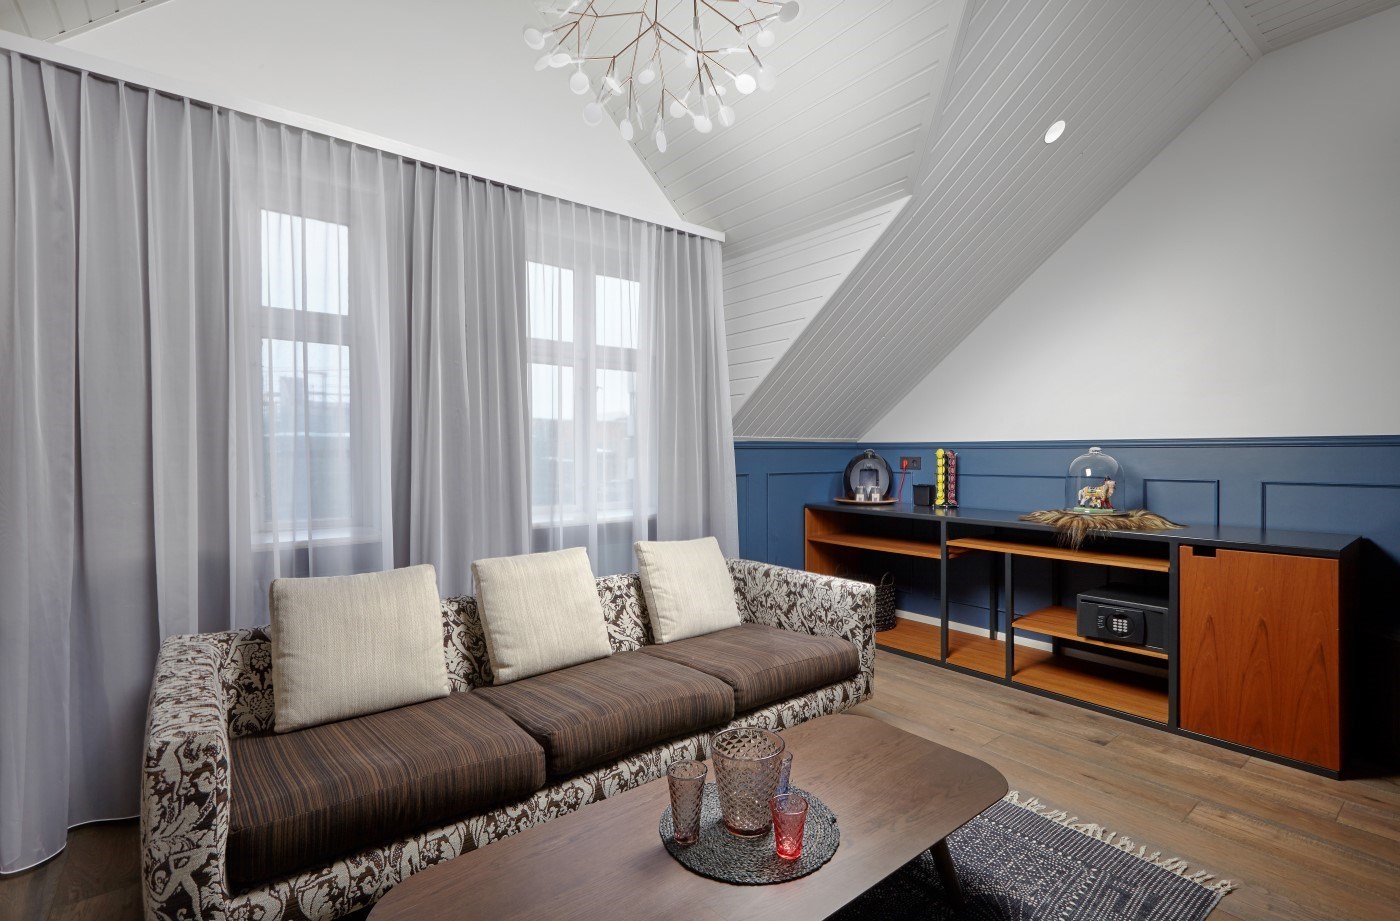 Living area within the Queen Suite at Alda Hotel in Iceland